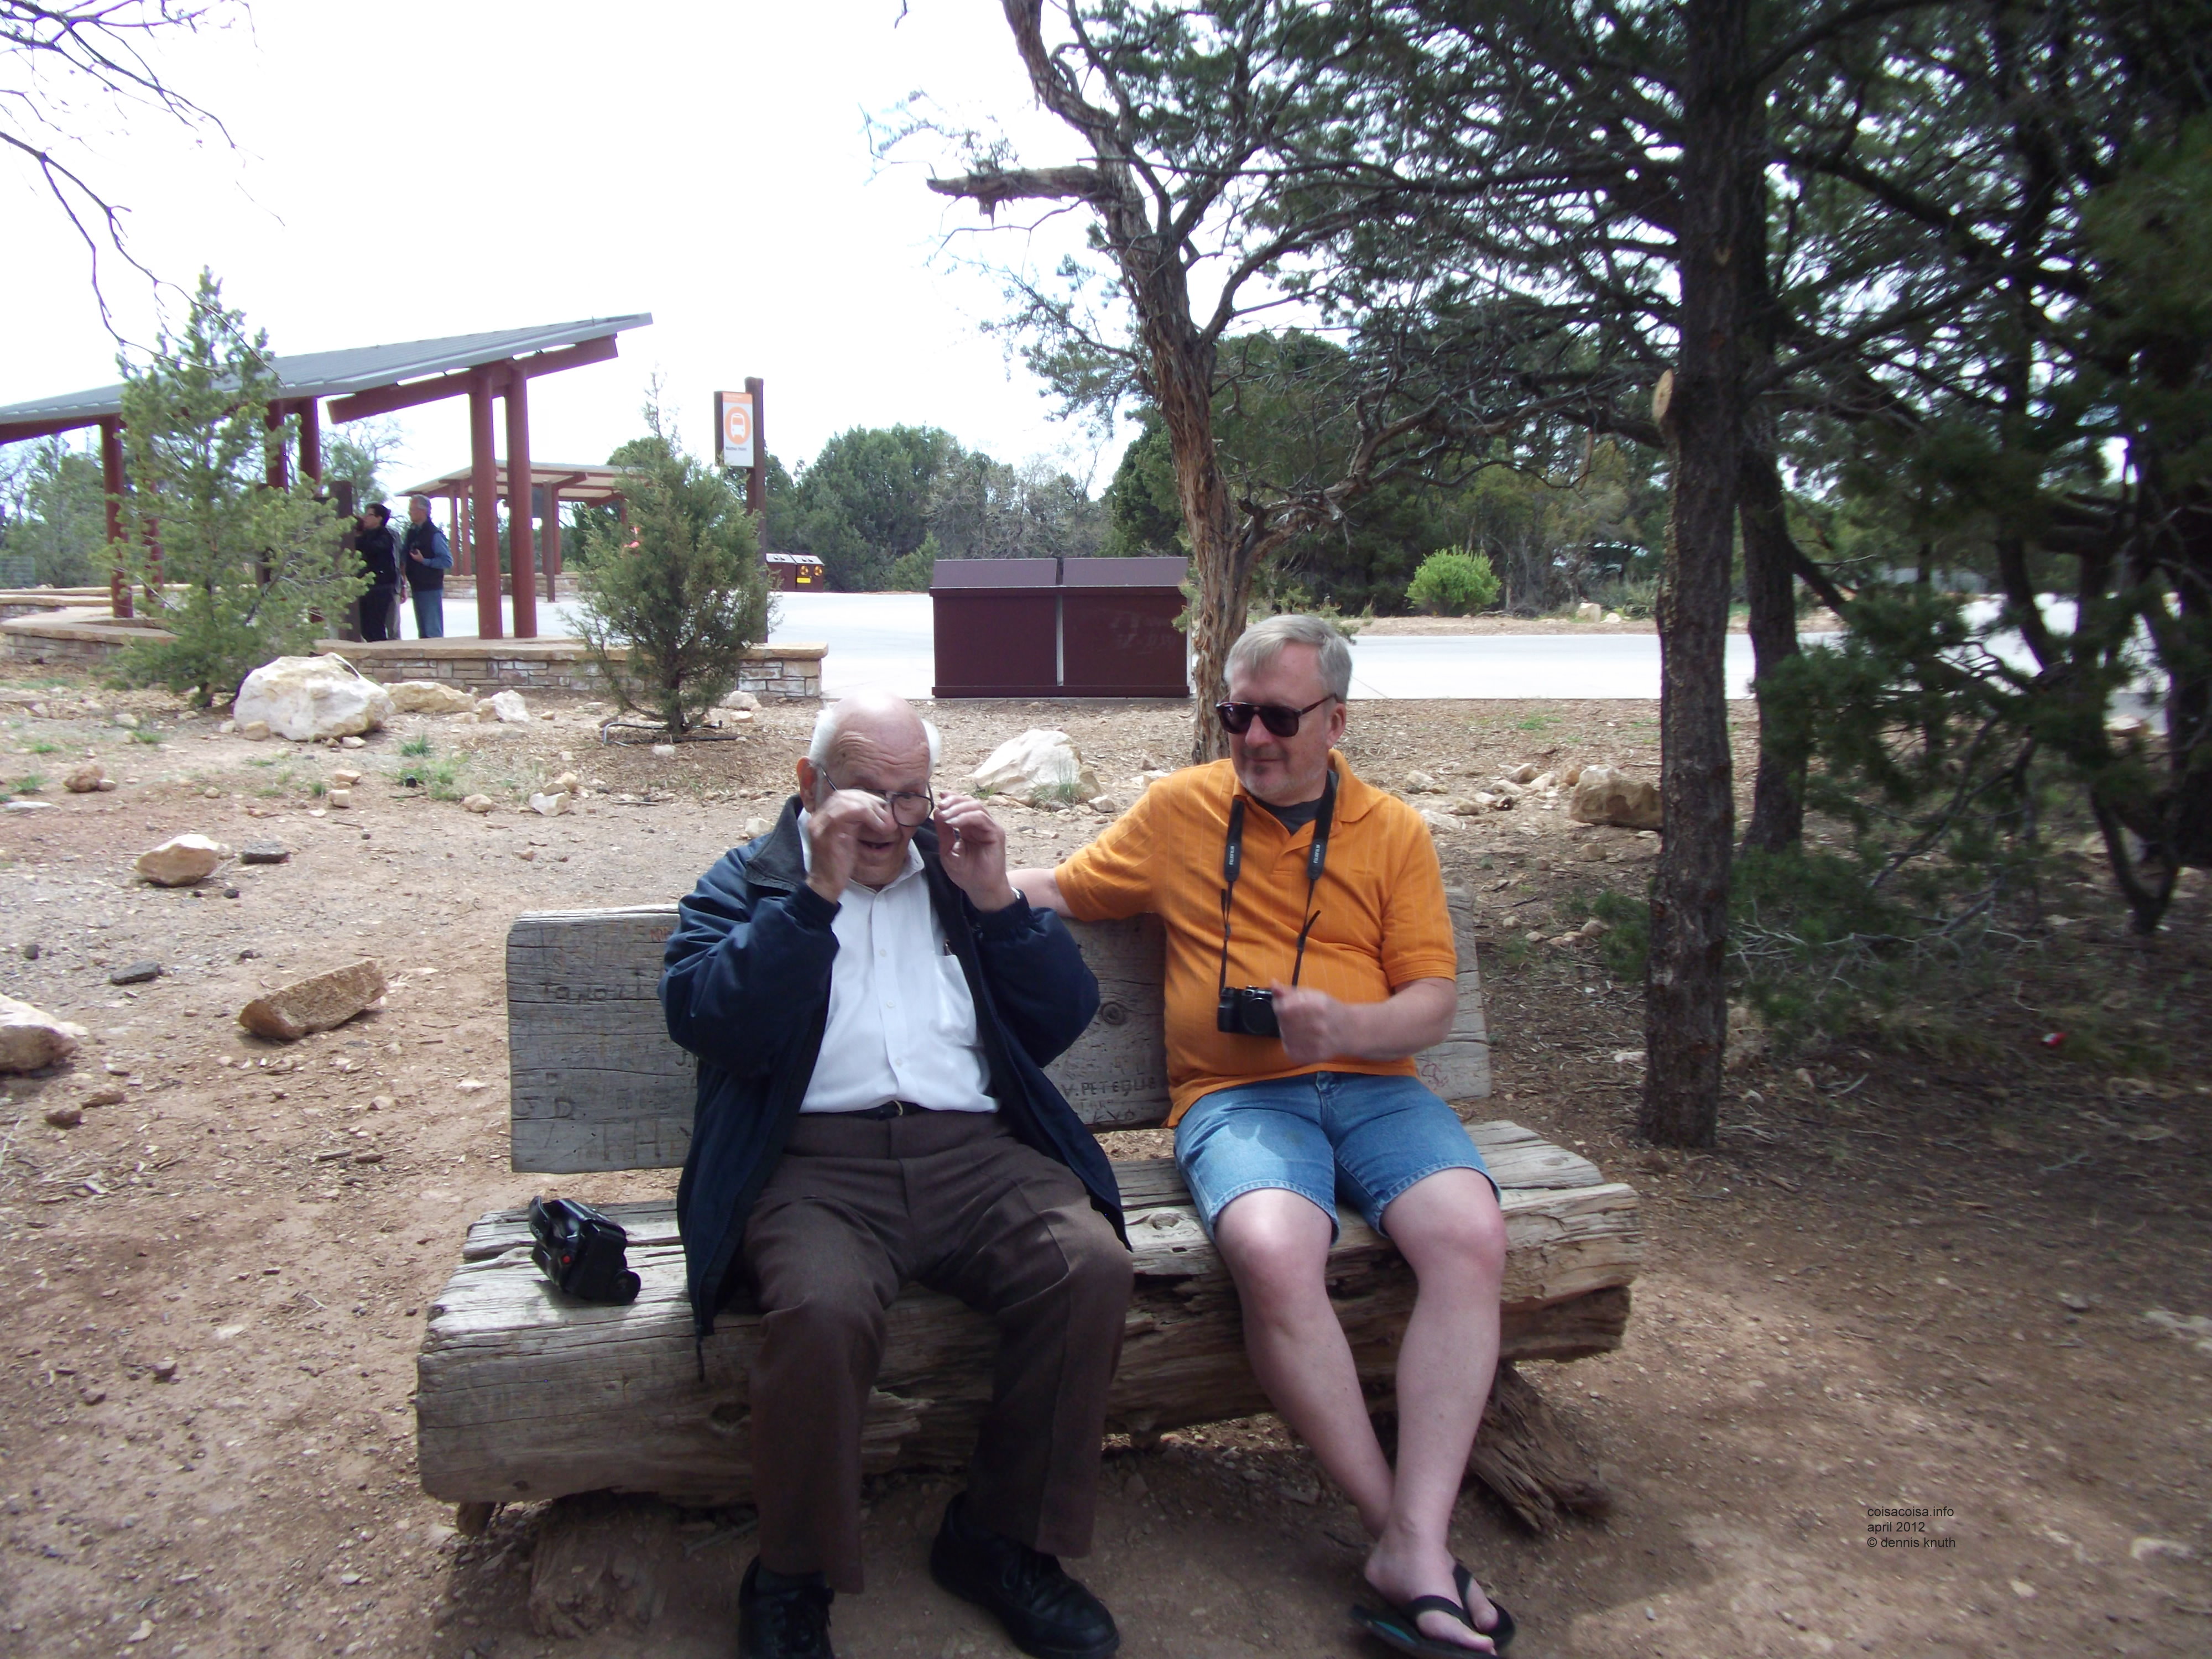 Orestus and Dennis Knuth take a rest